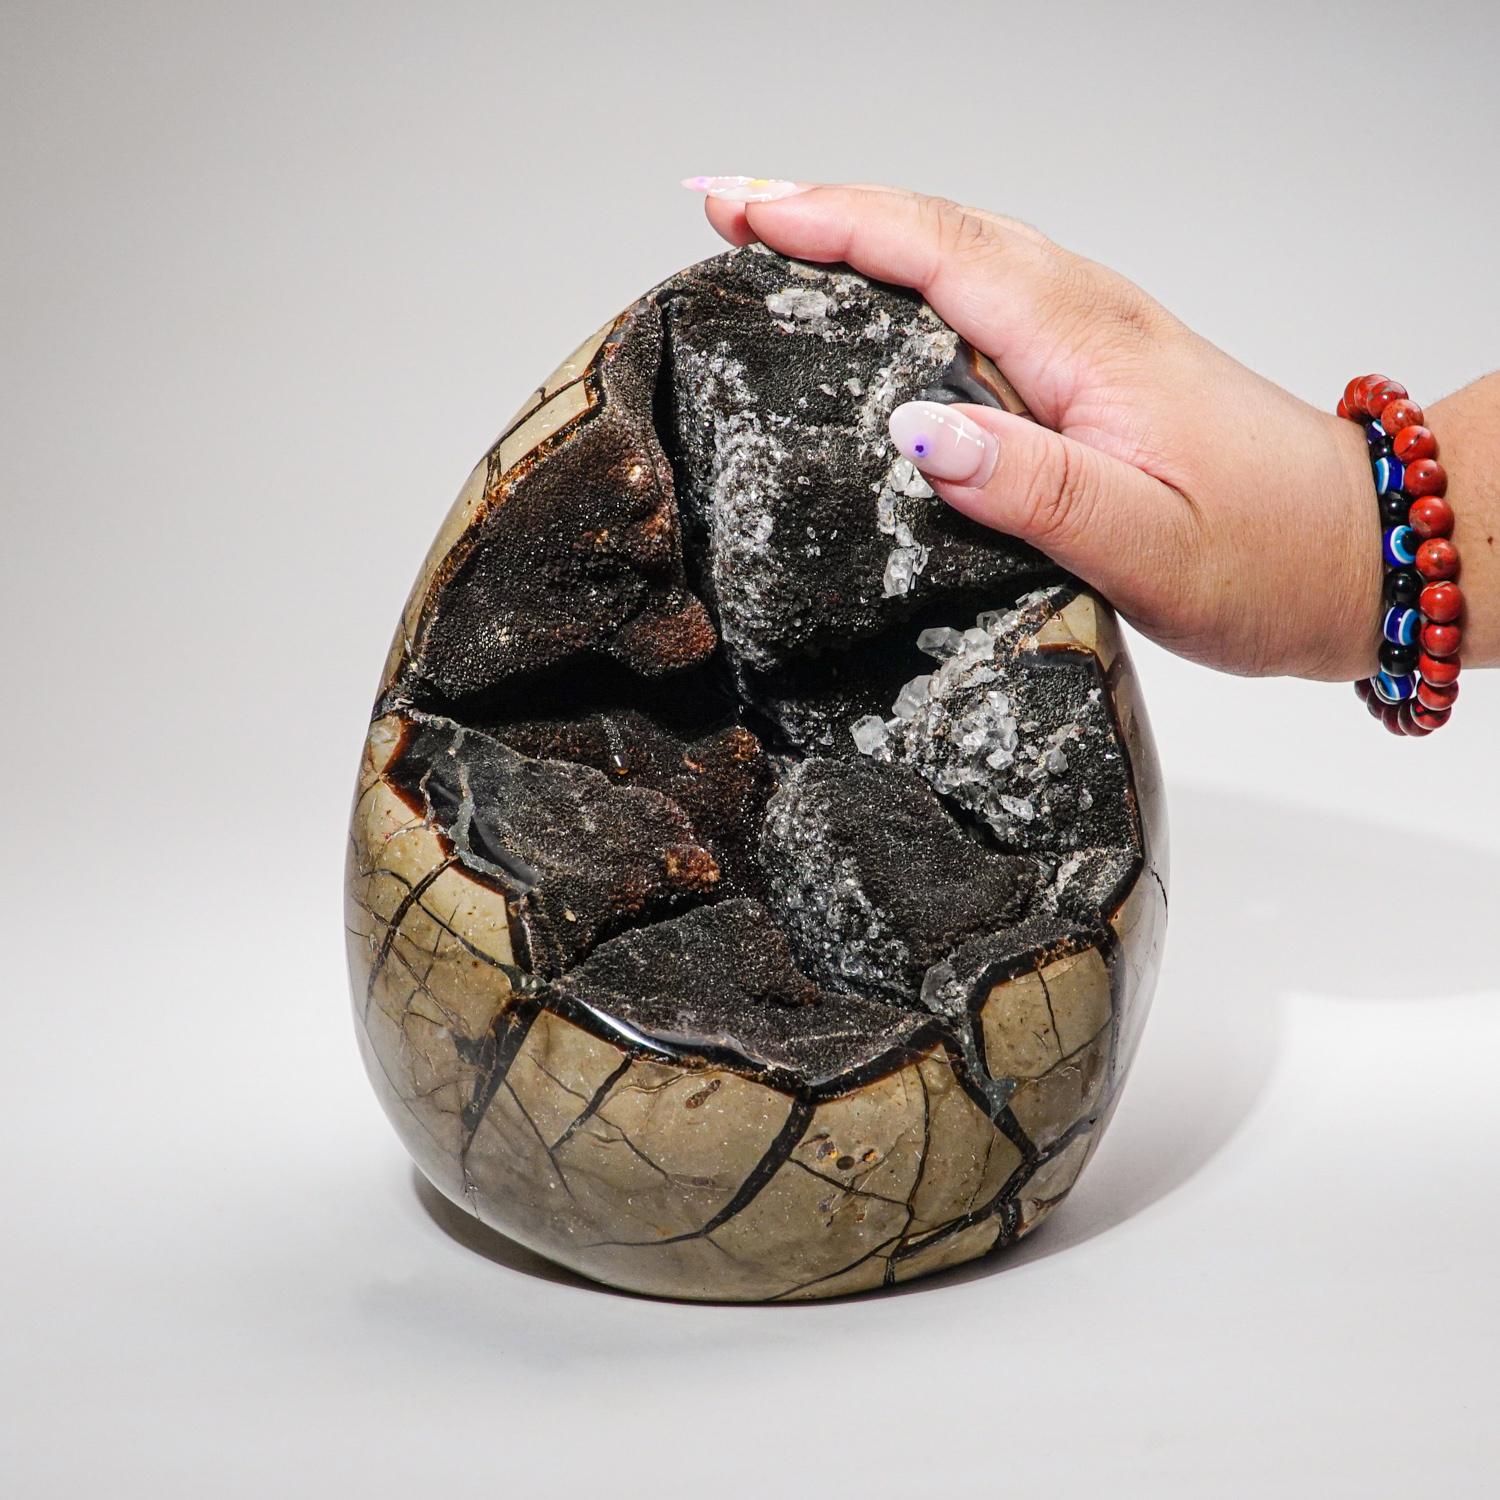 This 13.6 lb AAA quality Large Septarian Druzy Geode Egg from Madagascar features an exposed area lined with dazzling druzy quartz crystals, as well as a polished back side, providing a high reflective surface. Septarian is a combination of yellow